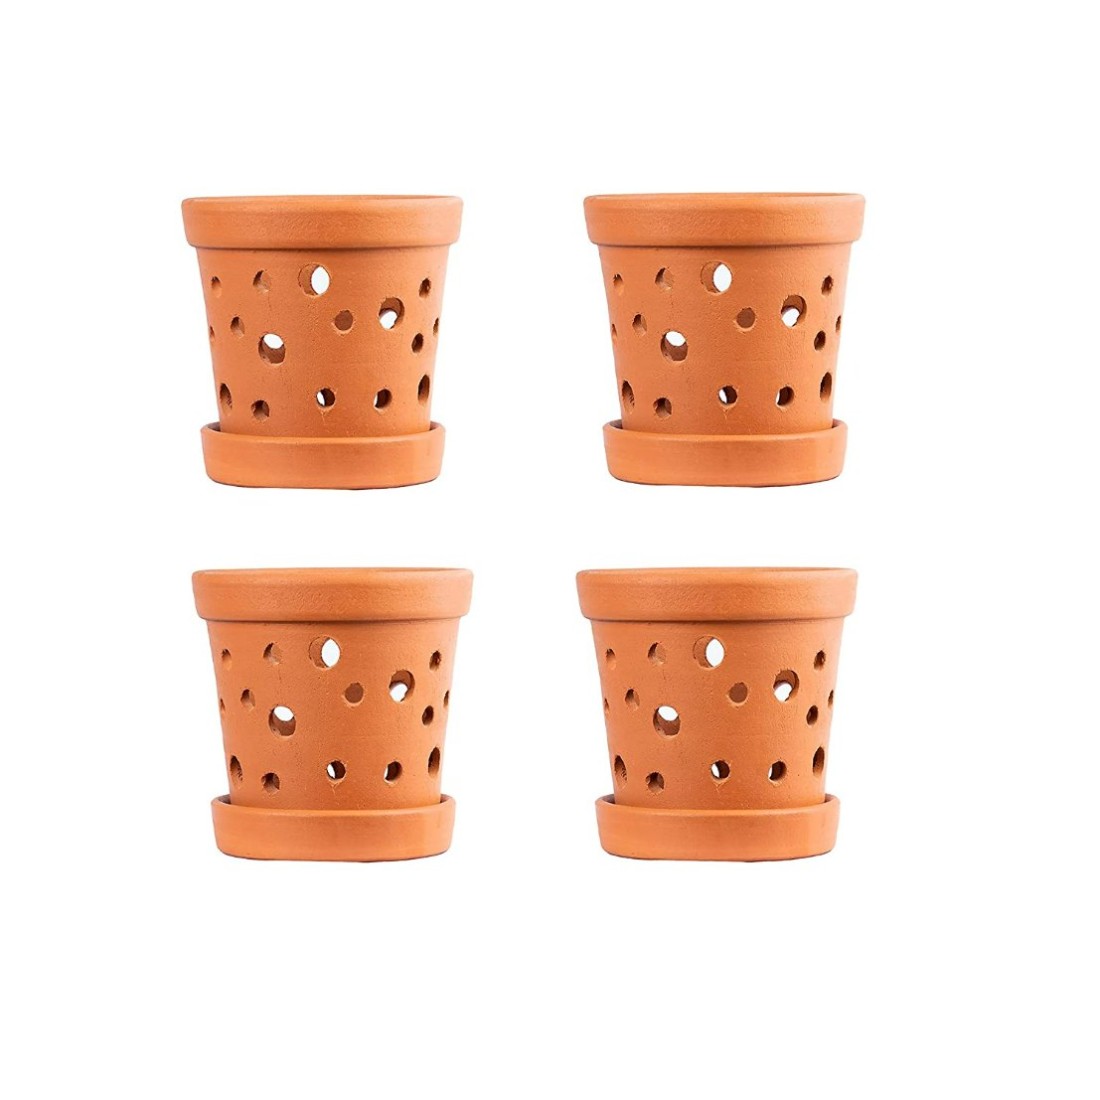 Premium Terracotta Matka Orchid Pots/Planter 6” inch Size with Saucer, Flower Pot with Tray for Indoor Outdoor Plant ( Pack of 4 pots) 1